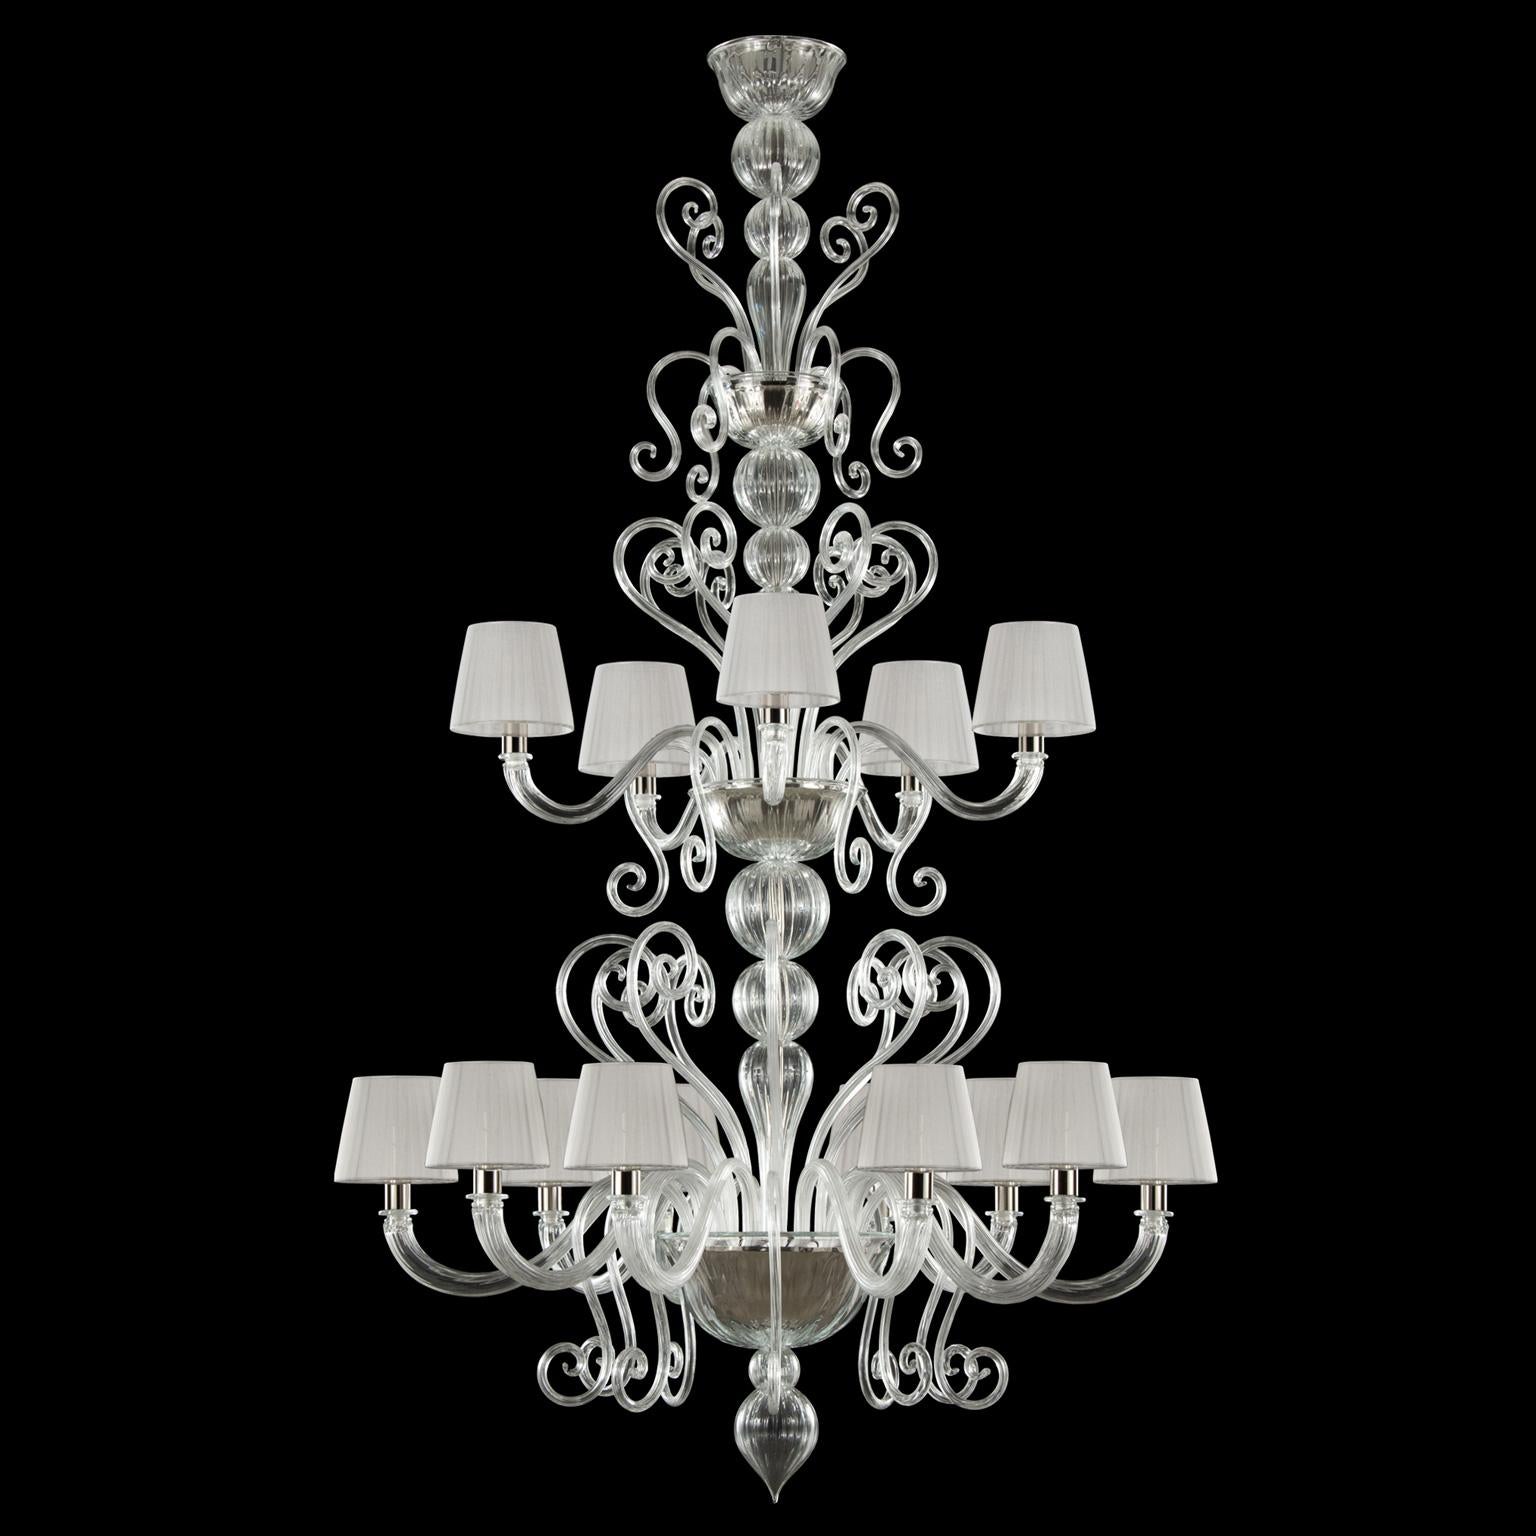 Gatsby chandelier 10+5 lights clear artistic Murano glass, with light grey organza lampshades by Multiforme
The Venetian chandelier Gatsby is the perfect combination of elegant and modern elements. The use of color featuring bright tones, the